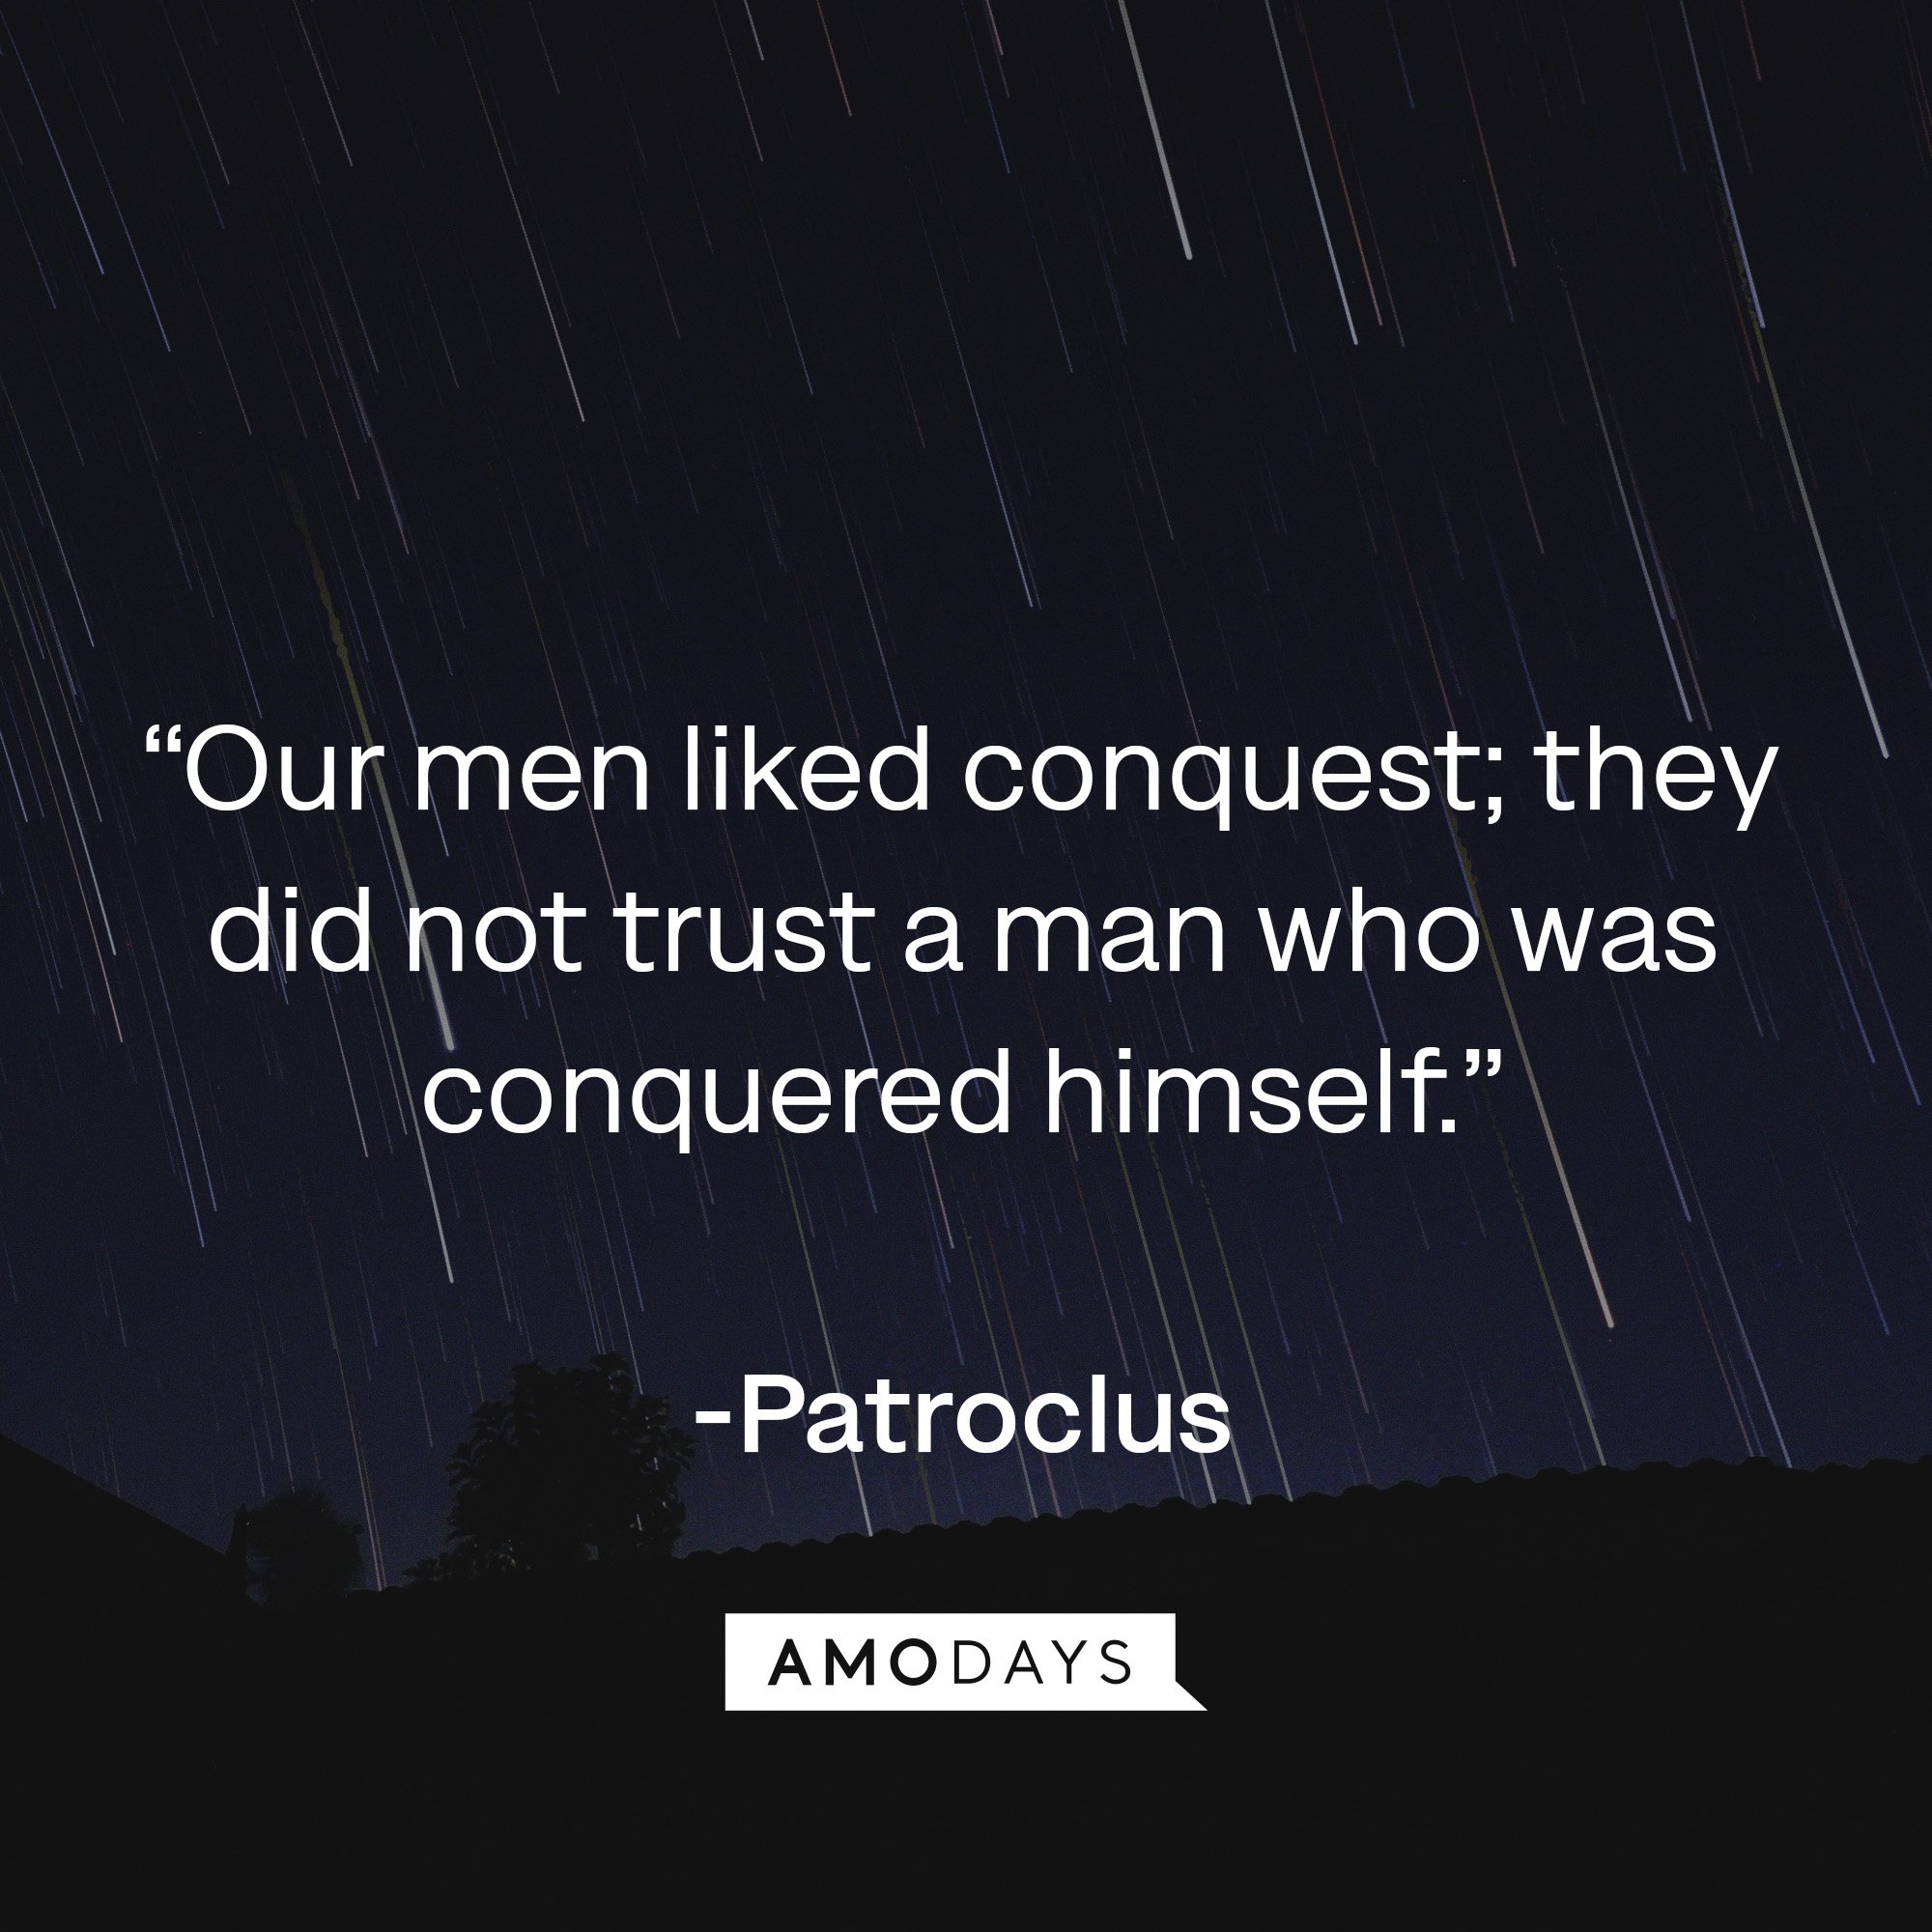 Patroclus's quote: “Our men liked conquest; they did not trust a man who was conquered himself.” | Image: AmoDays